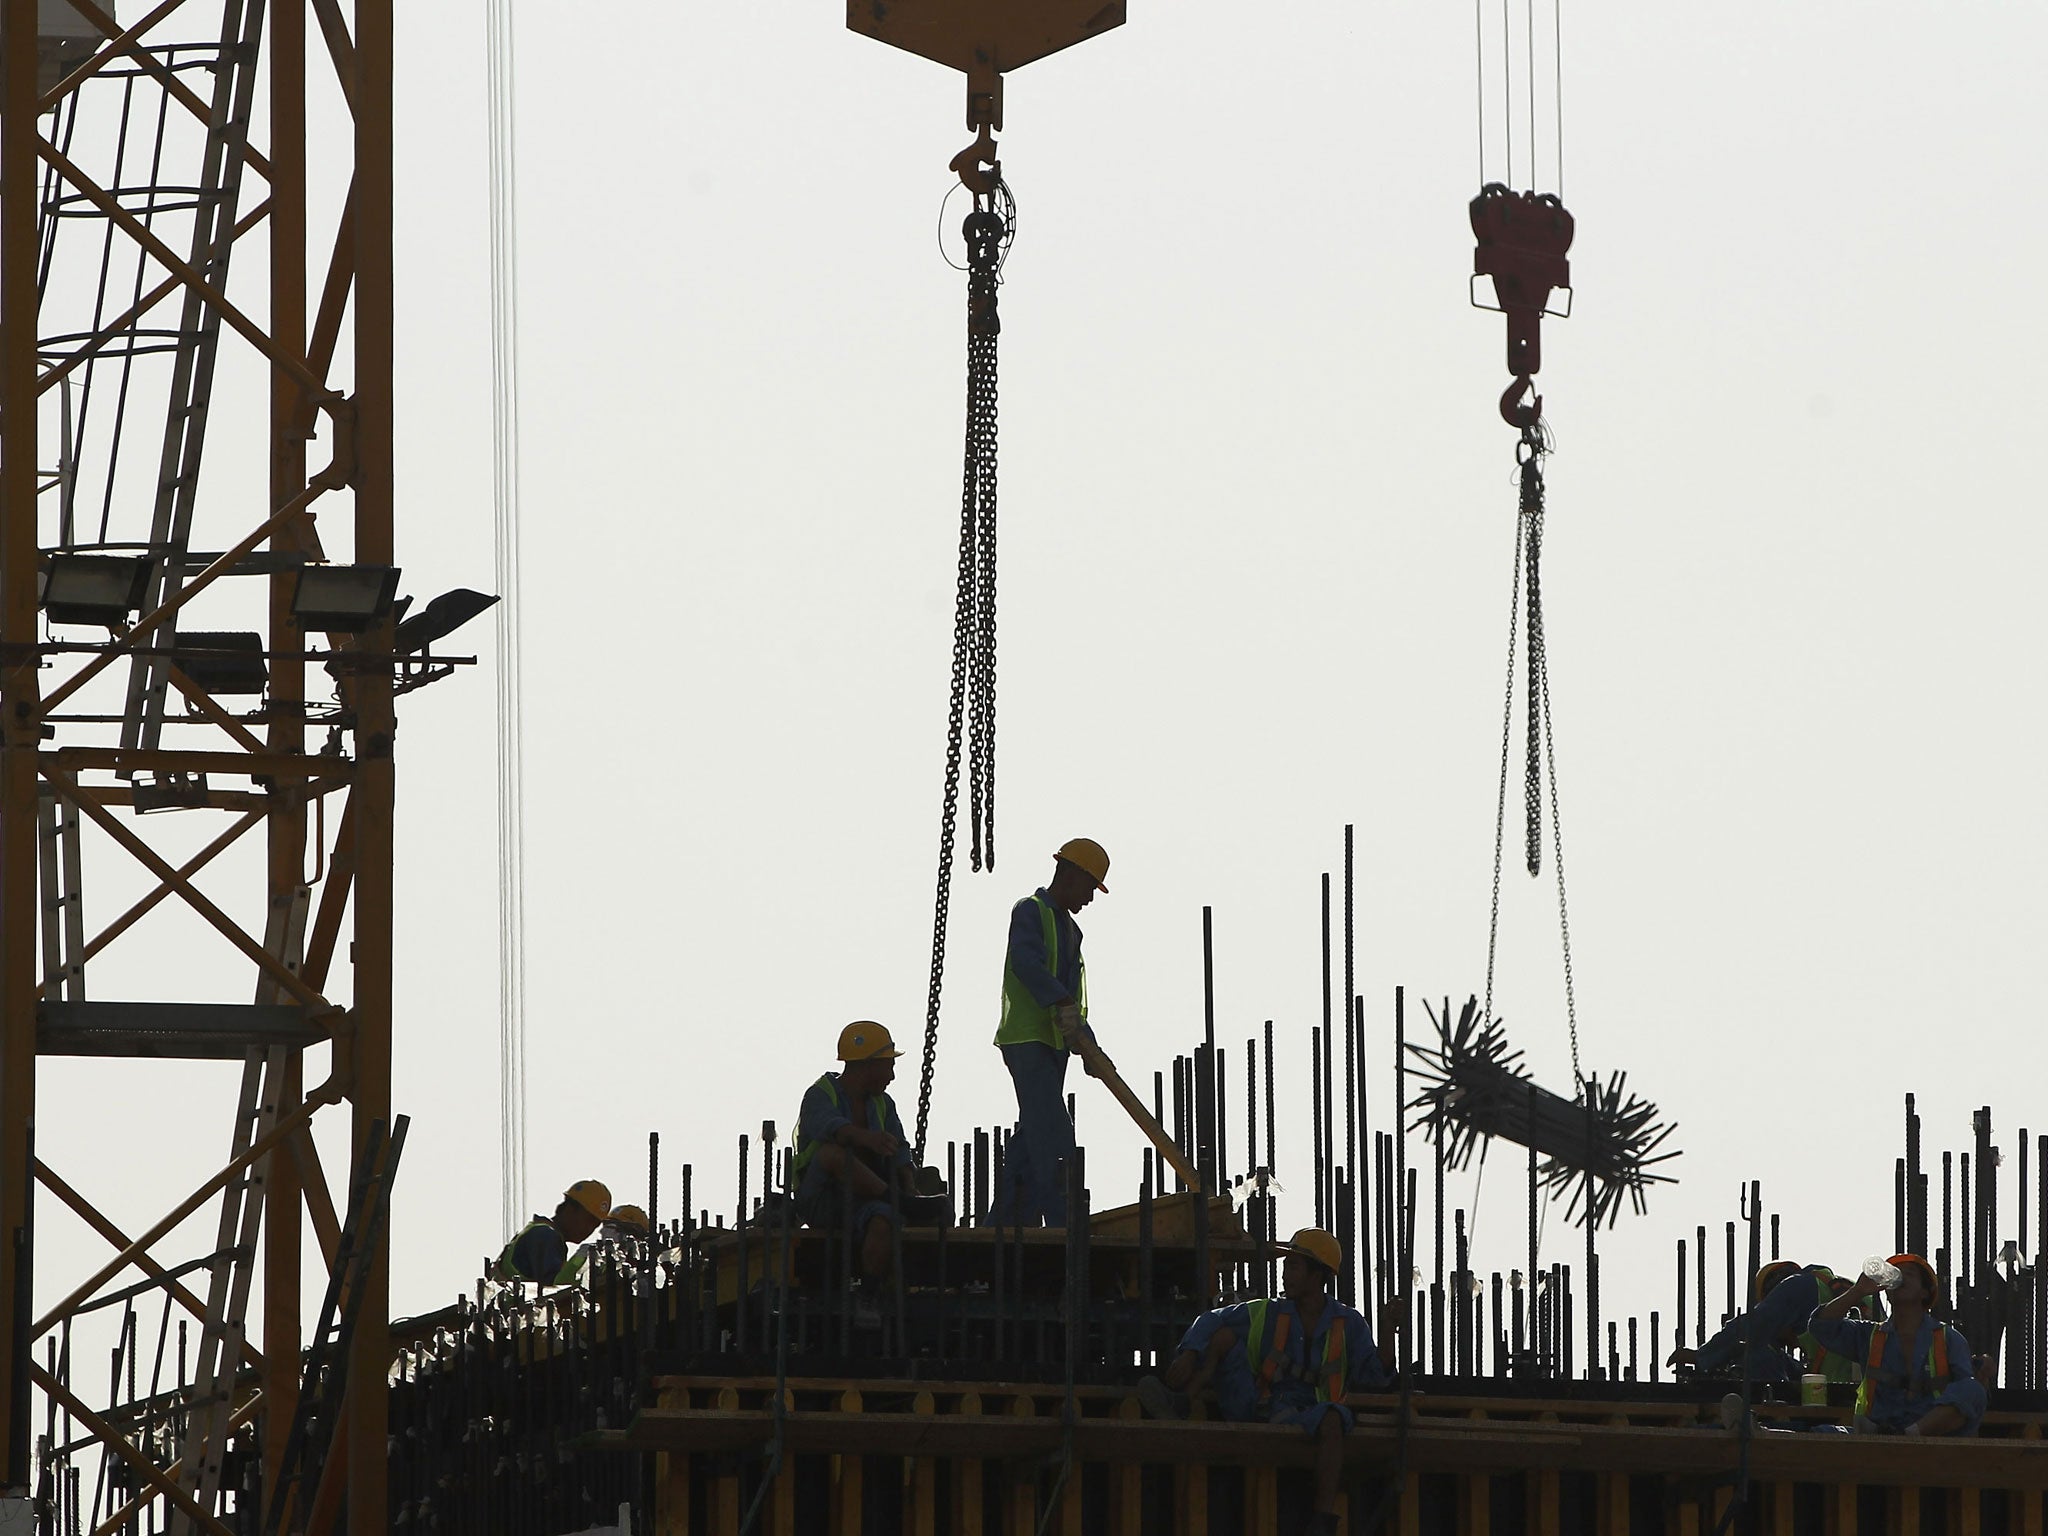 Workers, unrelated to the World Cup, stand on the construction site in Qatar. 